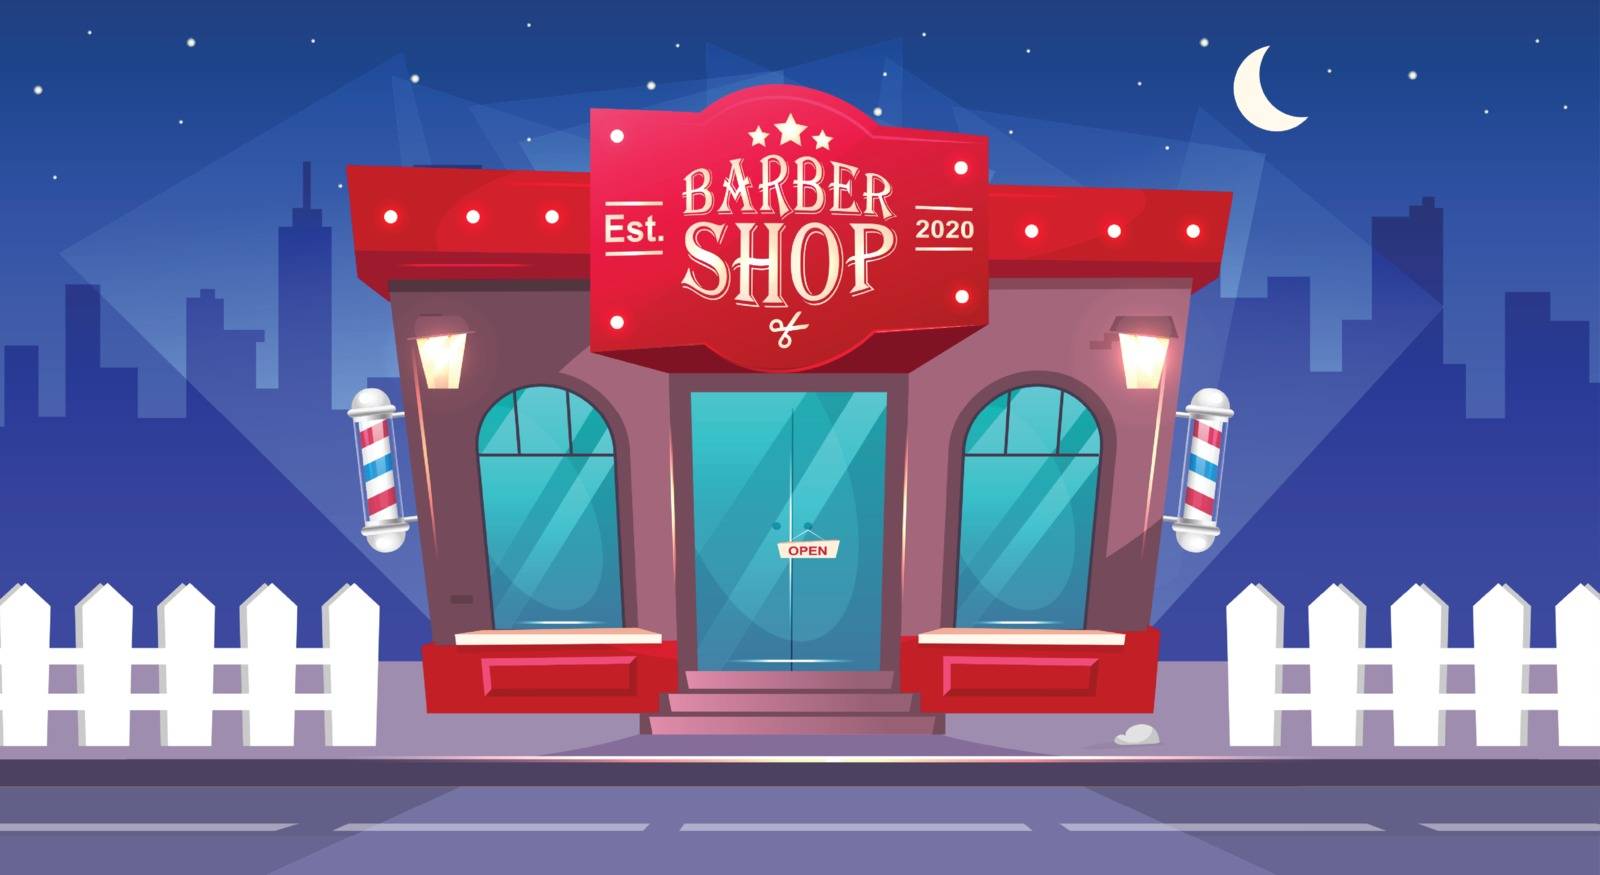 Barbershop front at night flat color vector illustration. Hairdresser store entrance. Barber shop brick building exterior. Nighttime 2D cartoon cityscape with sidewalk on background by ntl